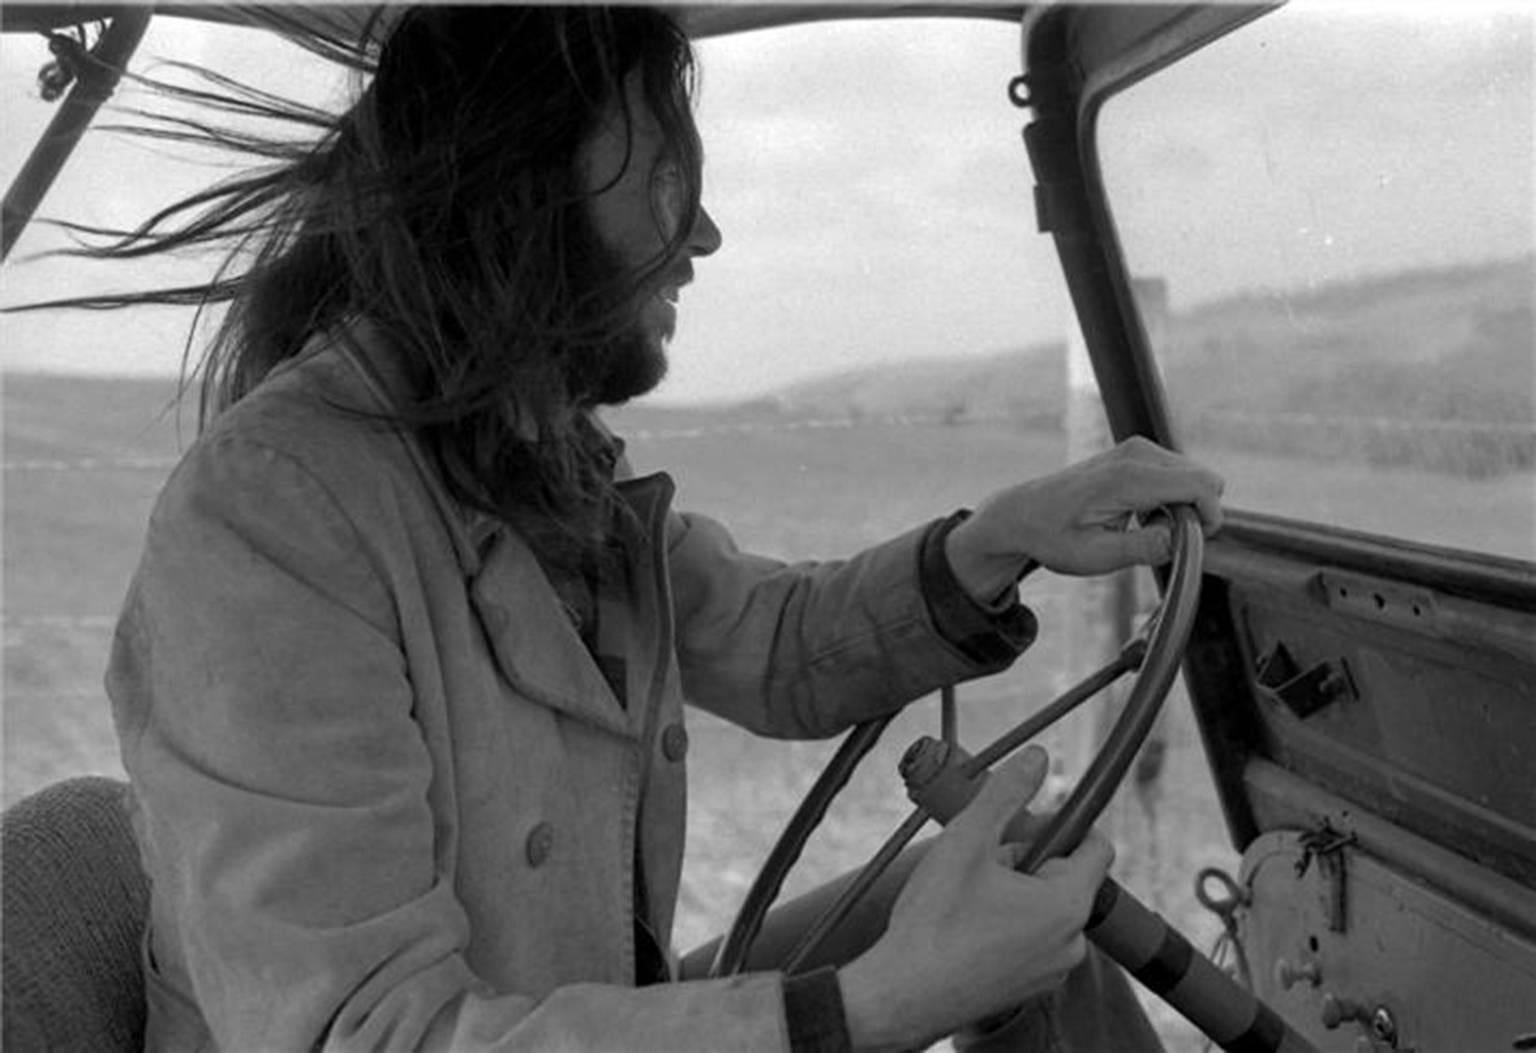 Henry Diltz Black and White Photograph - Neil Young "Jeep, " Malibu, 1975